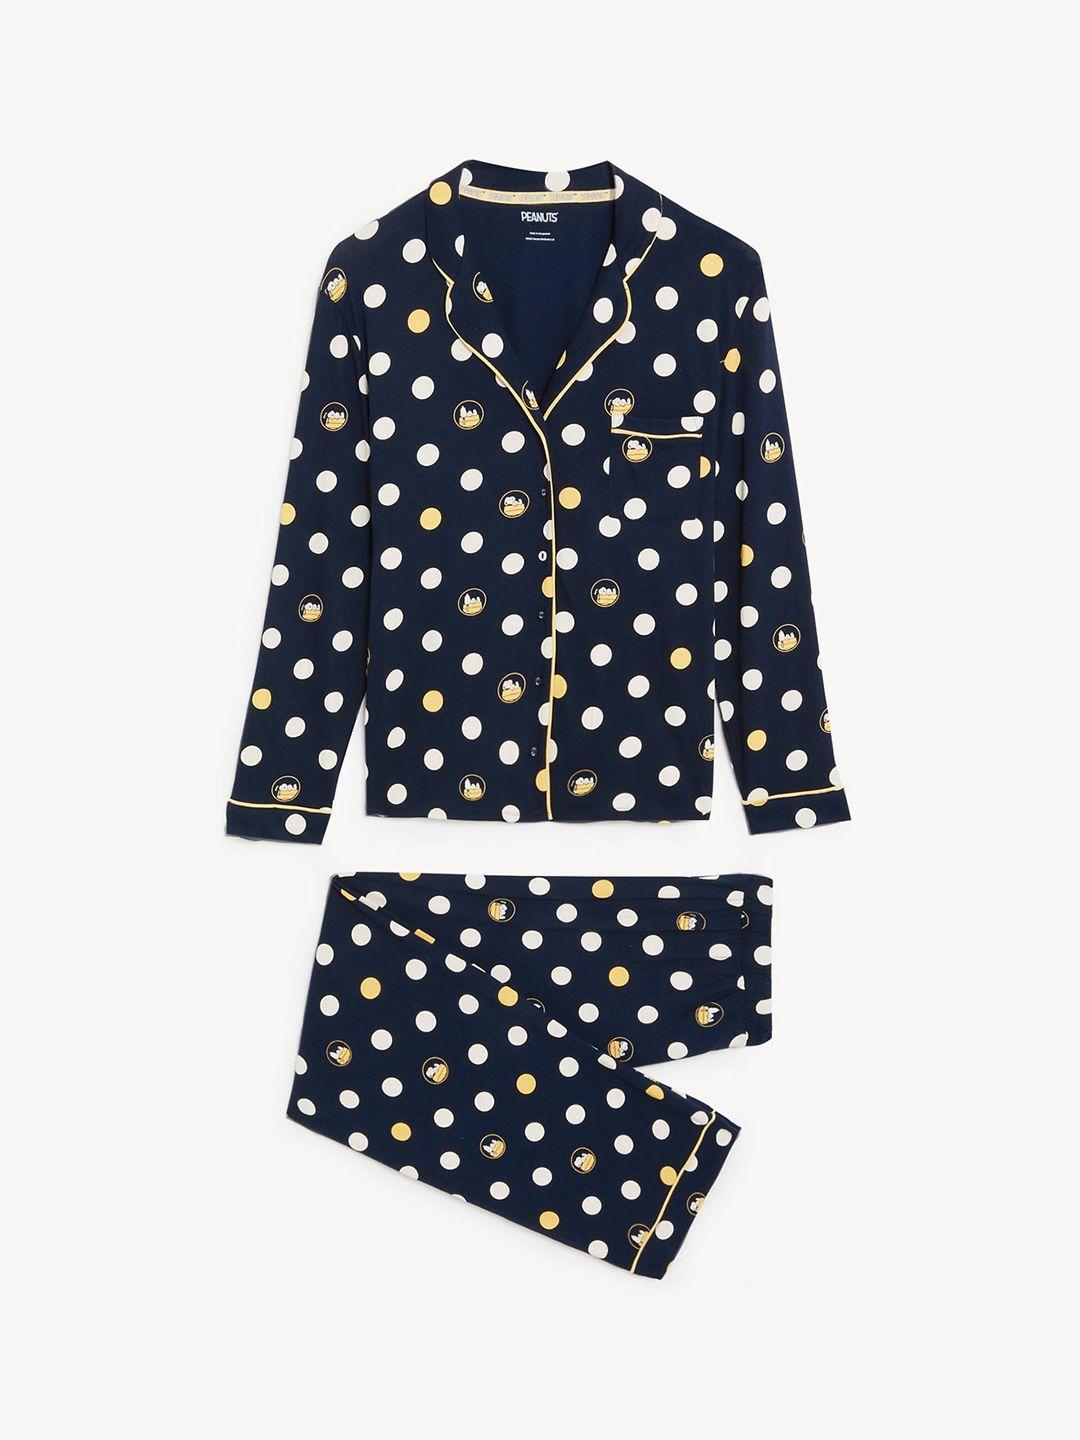 marks-&-spencer-women-2-pieces-polka-dots-printed-night-suit